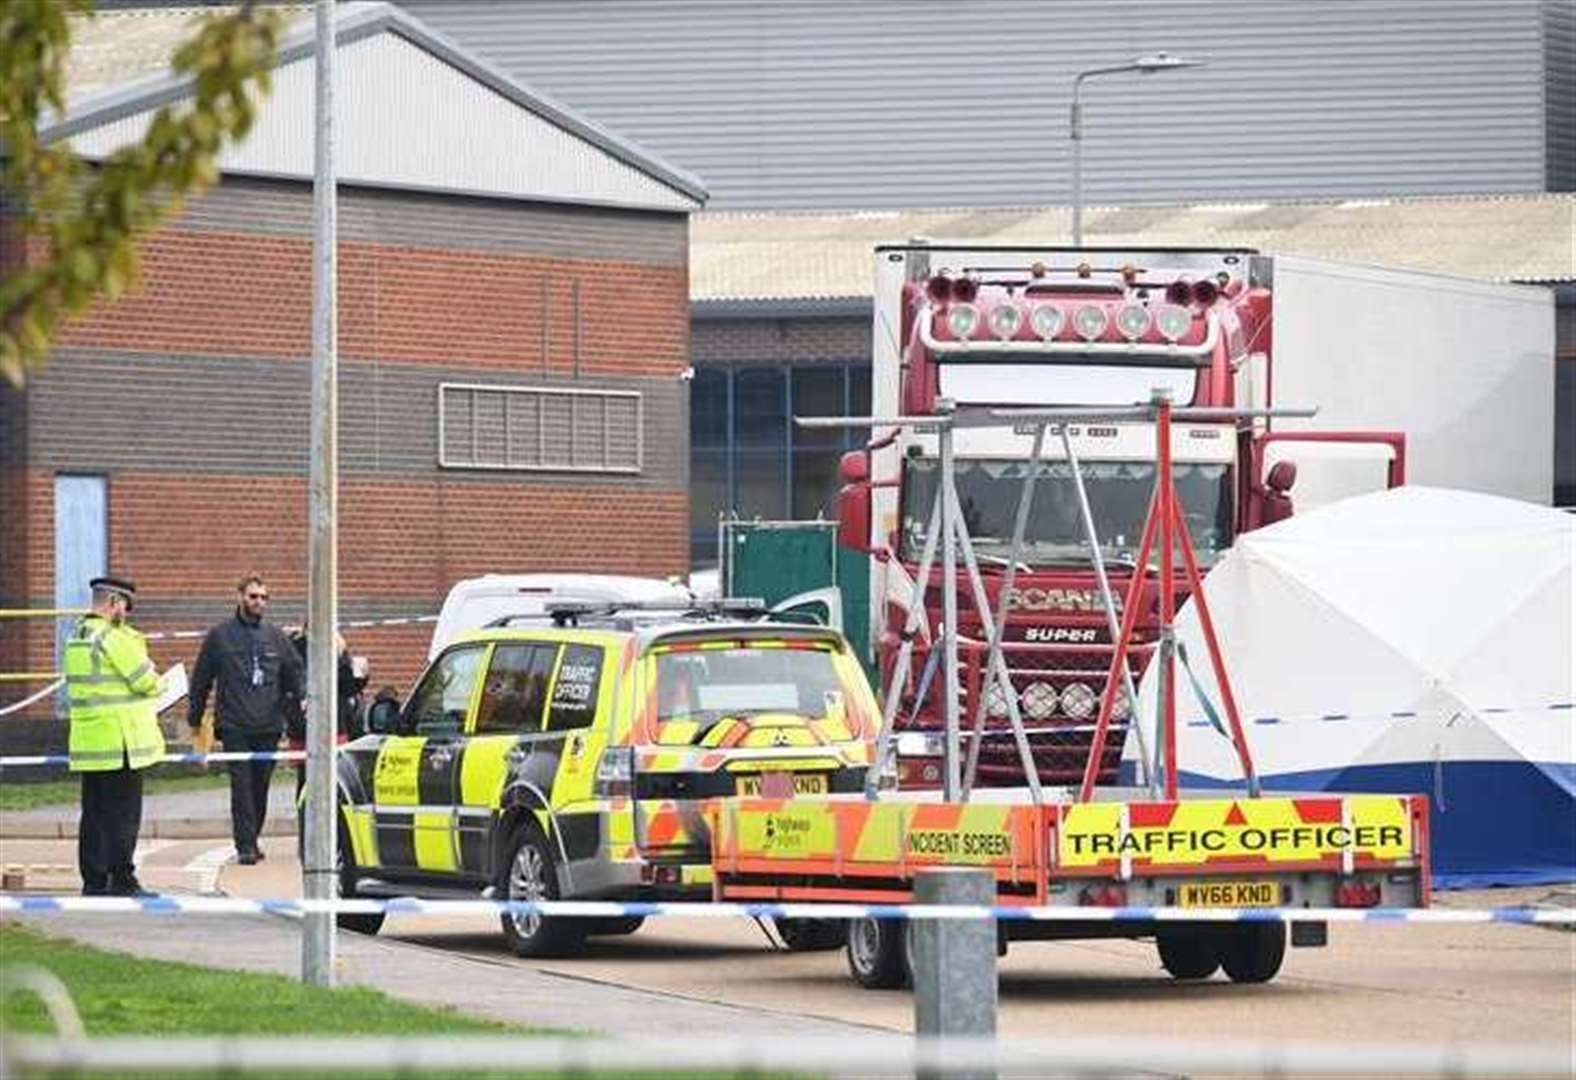 Bodies found in lorry were Chinese migrants